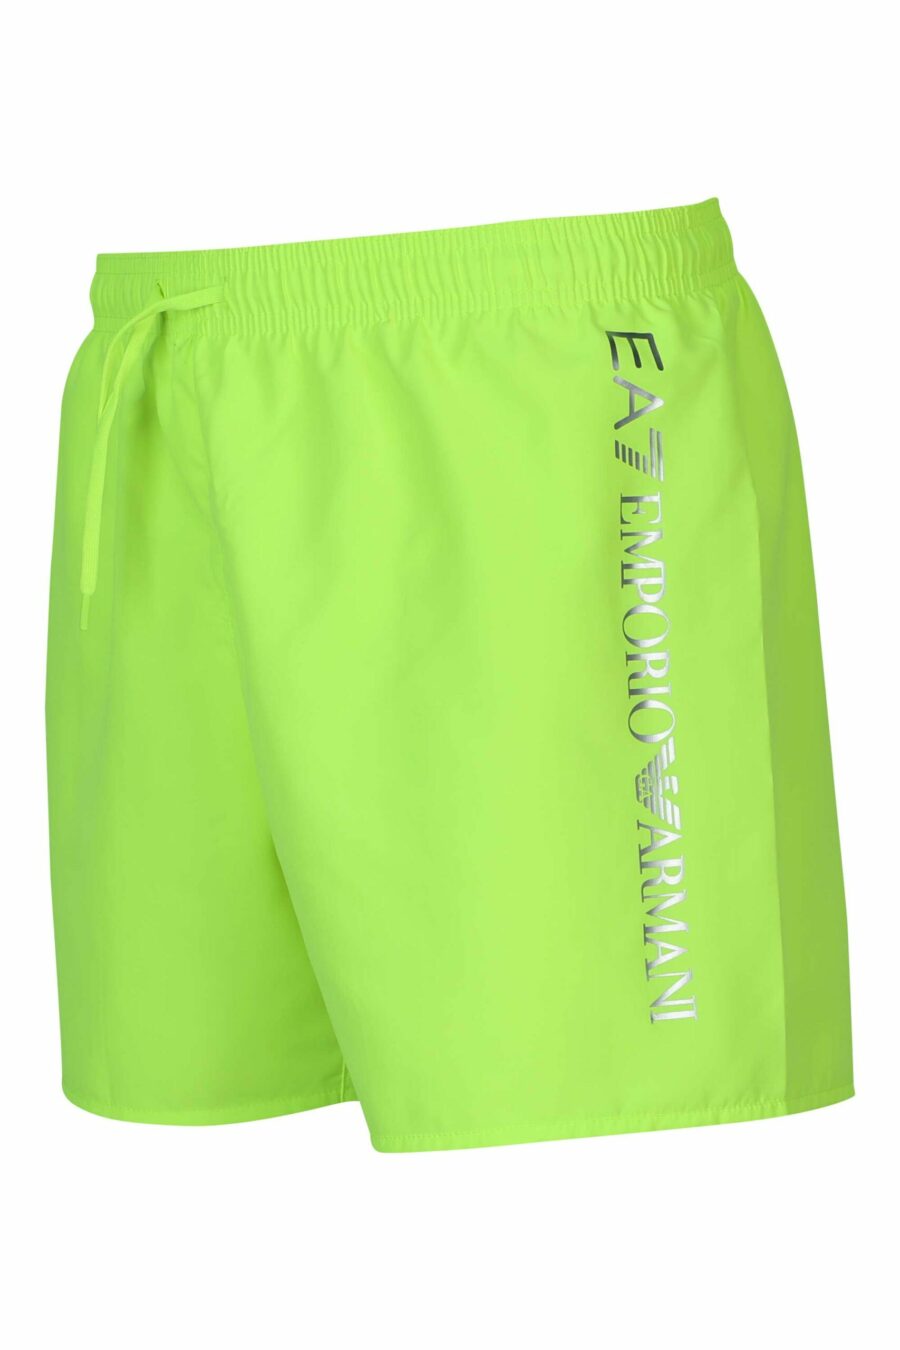 Neon green swimming costume with vertical side "lux identity" logo - 8059972905280 1 scaled